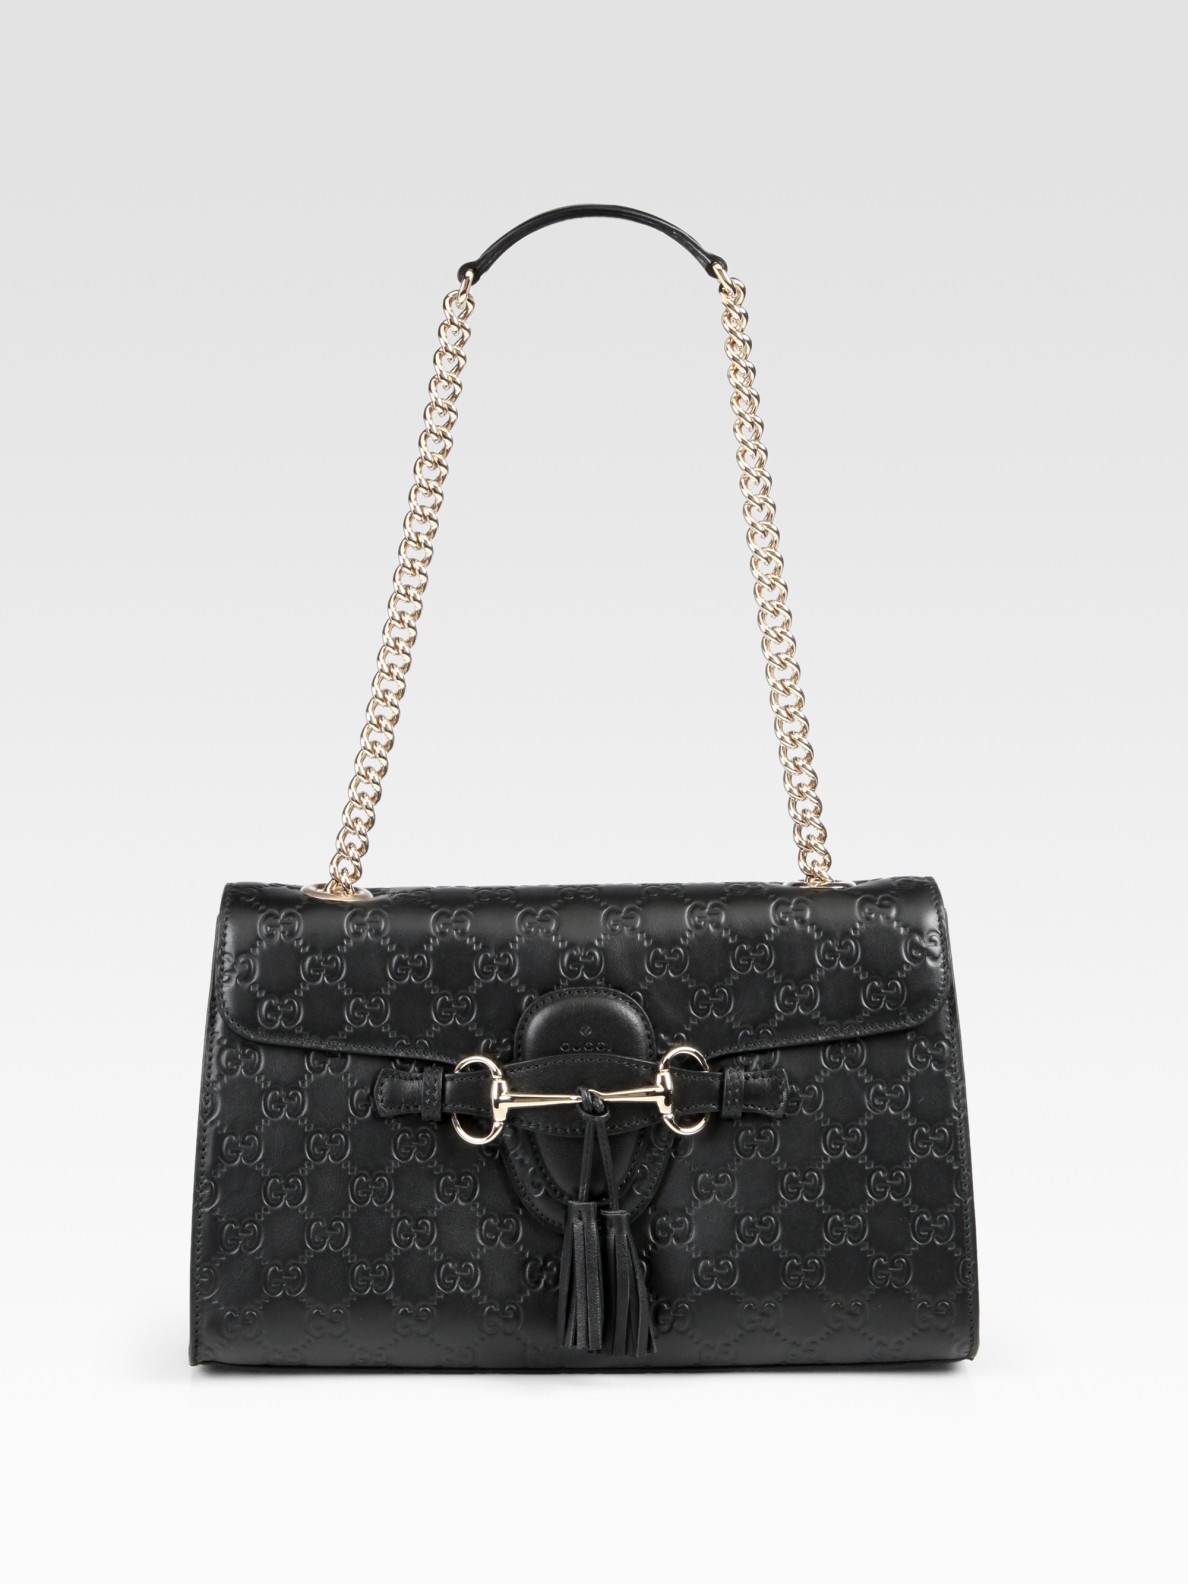 Gucci Emily Chain Ssima Leather Shoulder Bag in Black | Lyst